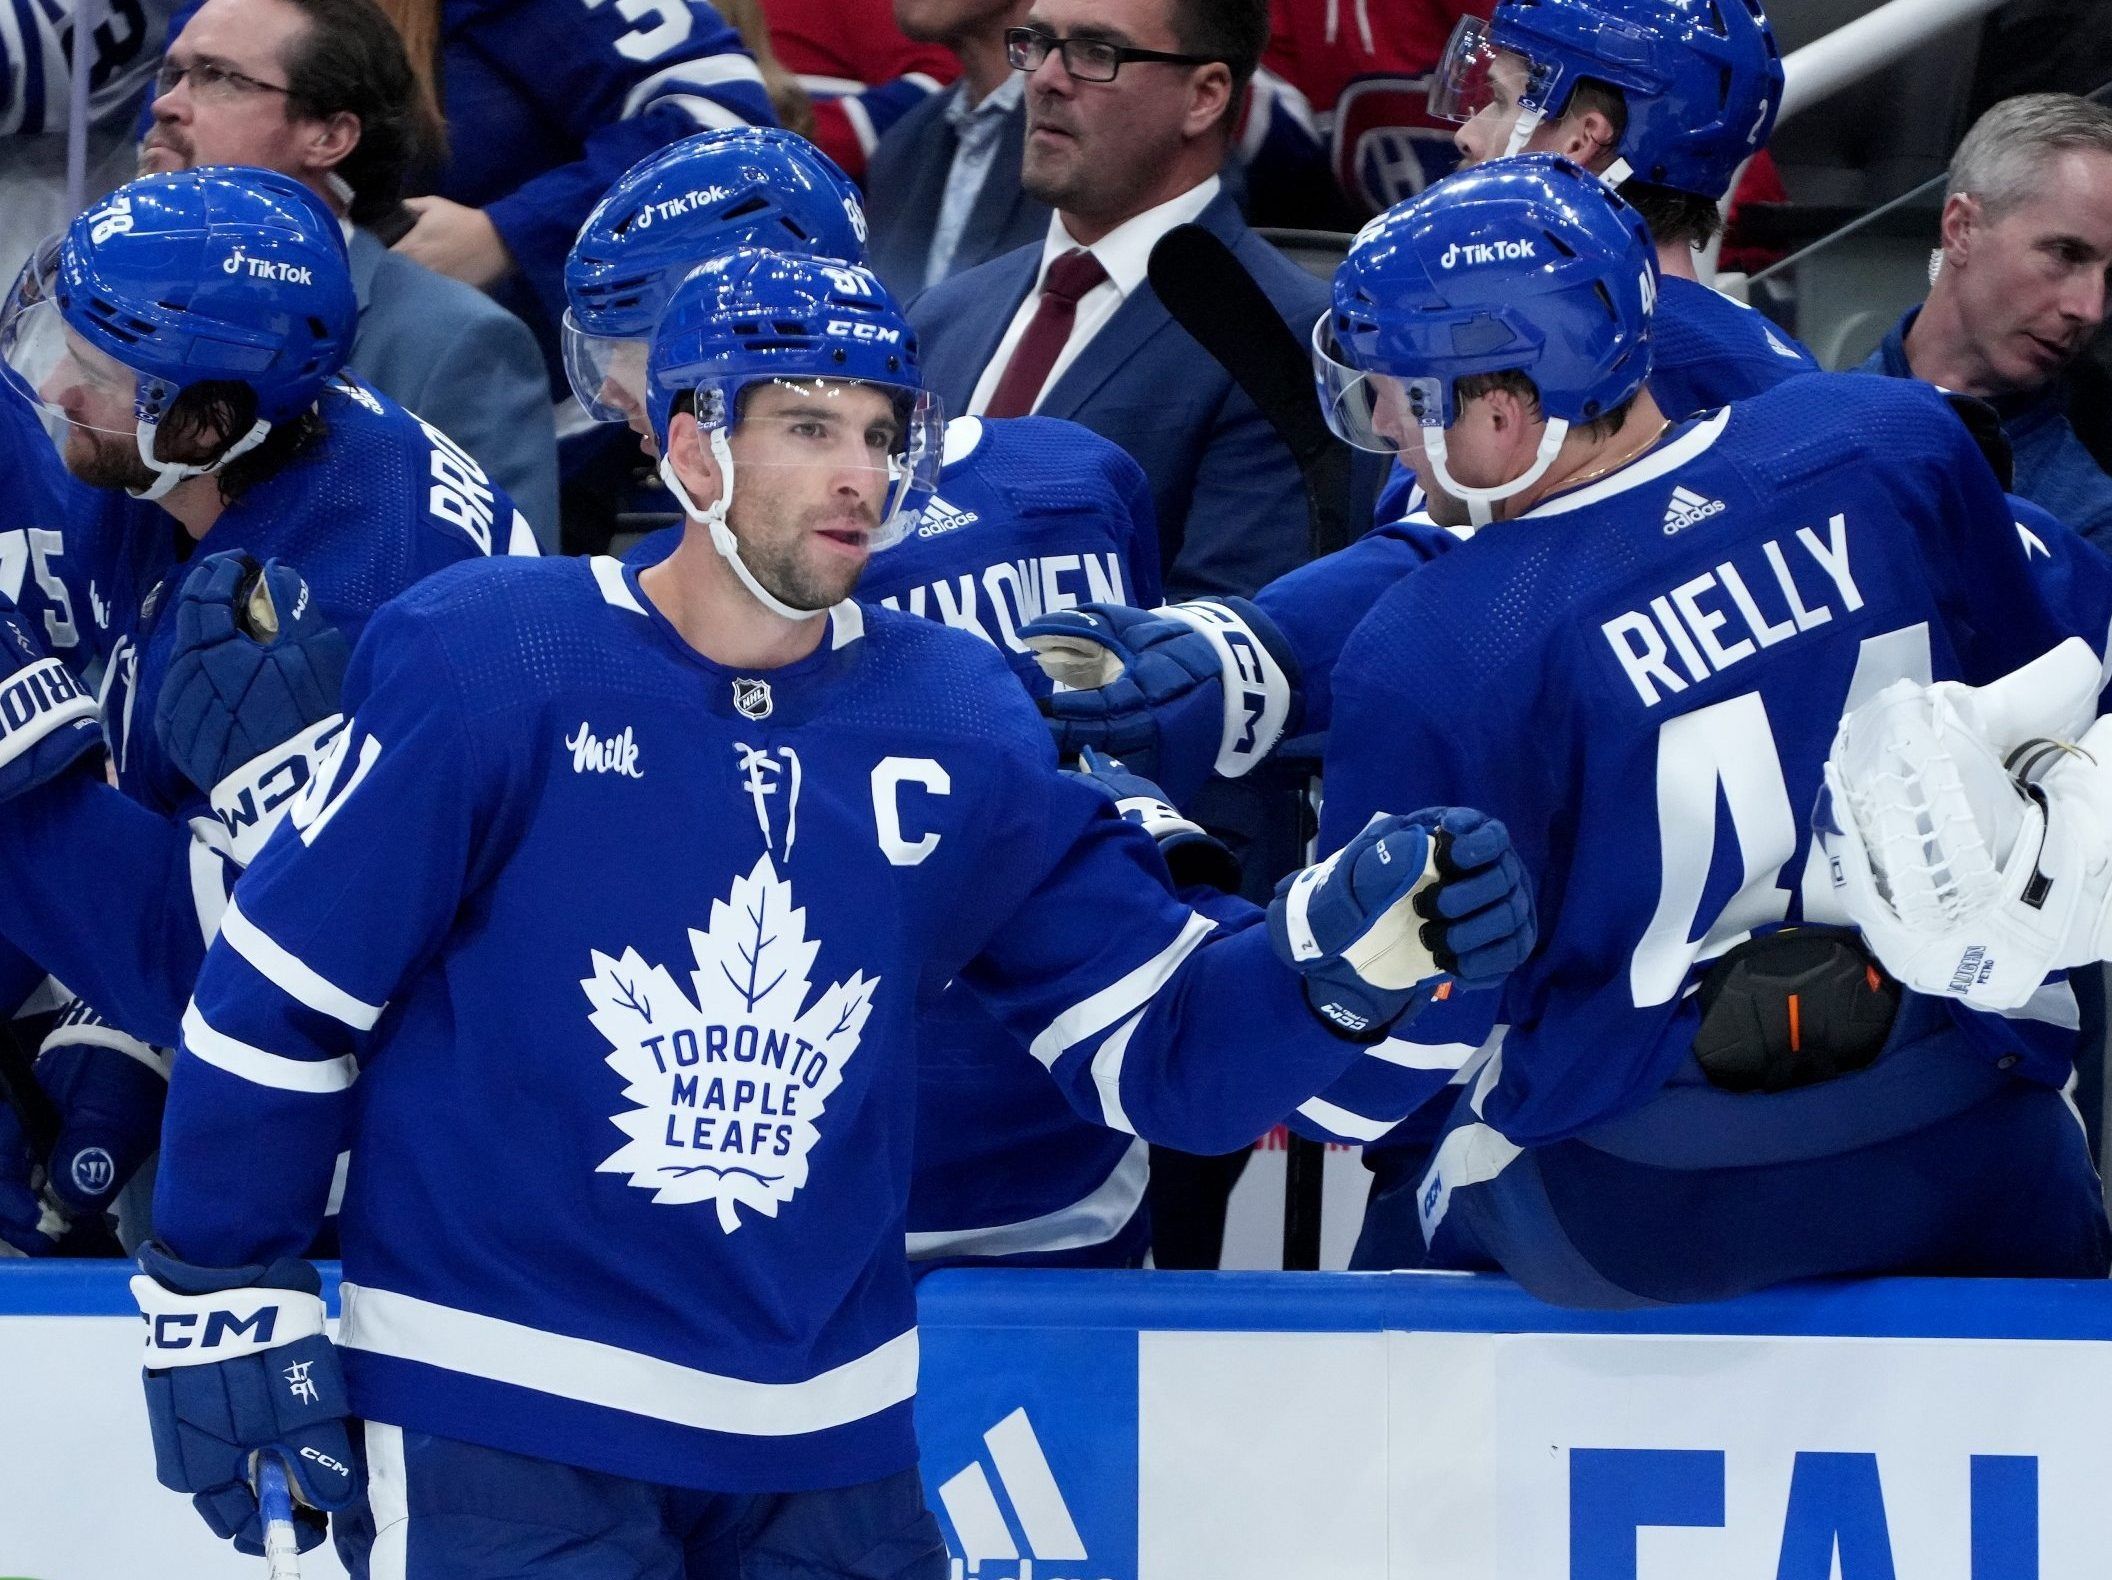 Toronto Maple Leafs: John Tavares Likely to Play in Philly